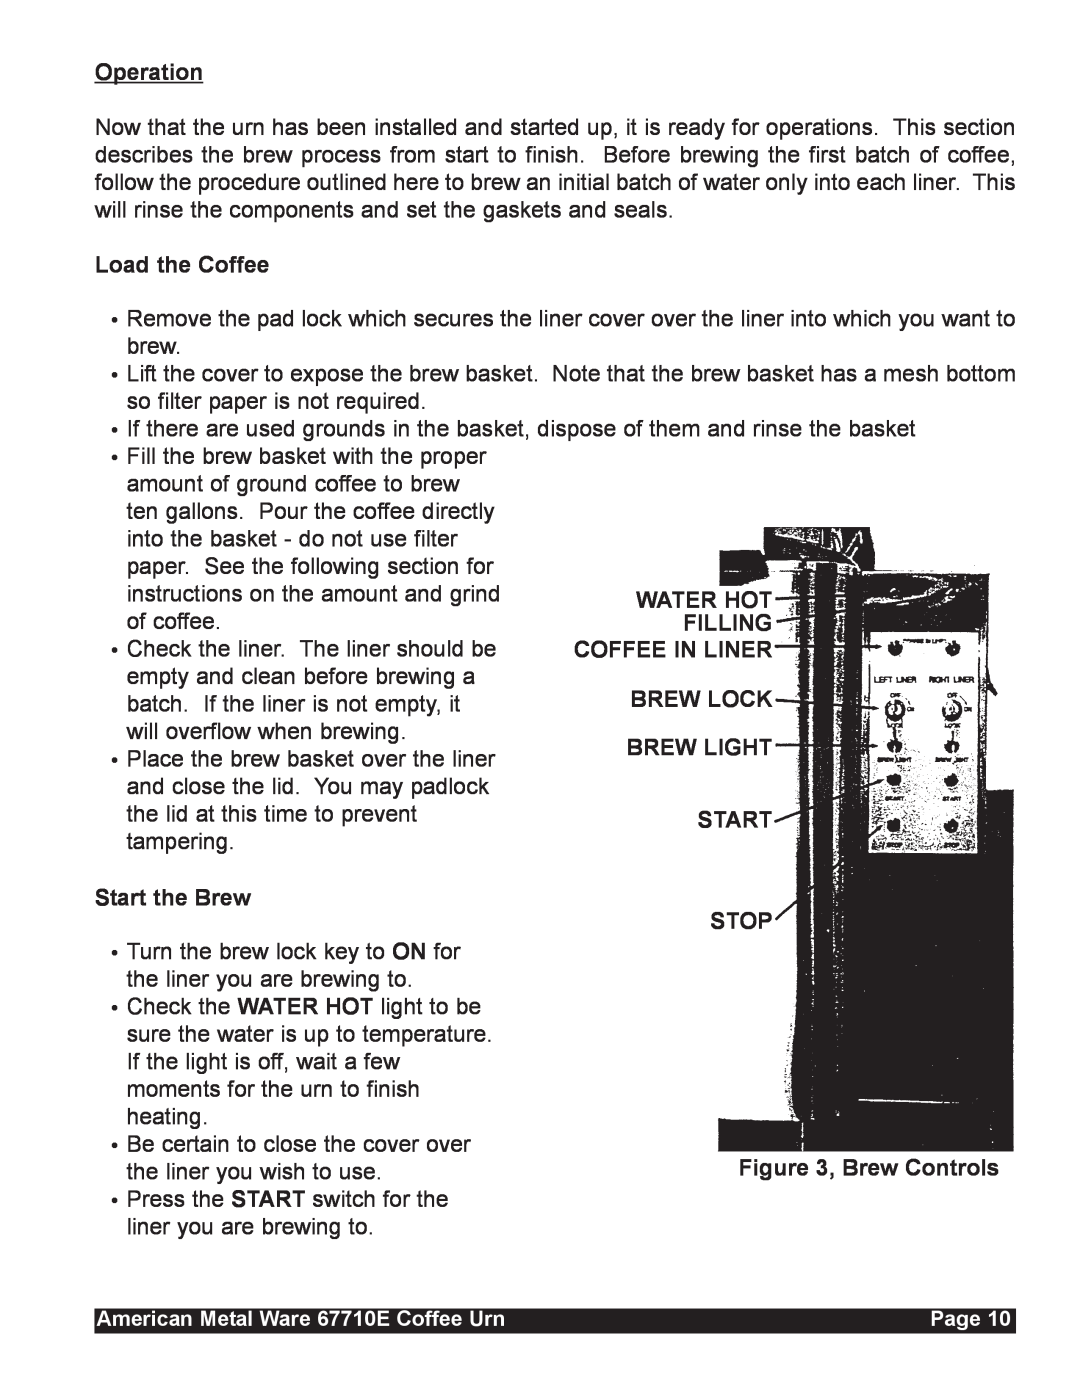 Grindmaster 67710E service manual Load the Coffee, Start the Brew, Brew Controls, Operation 